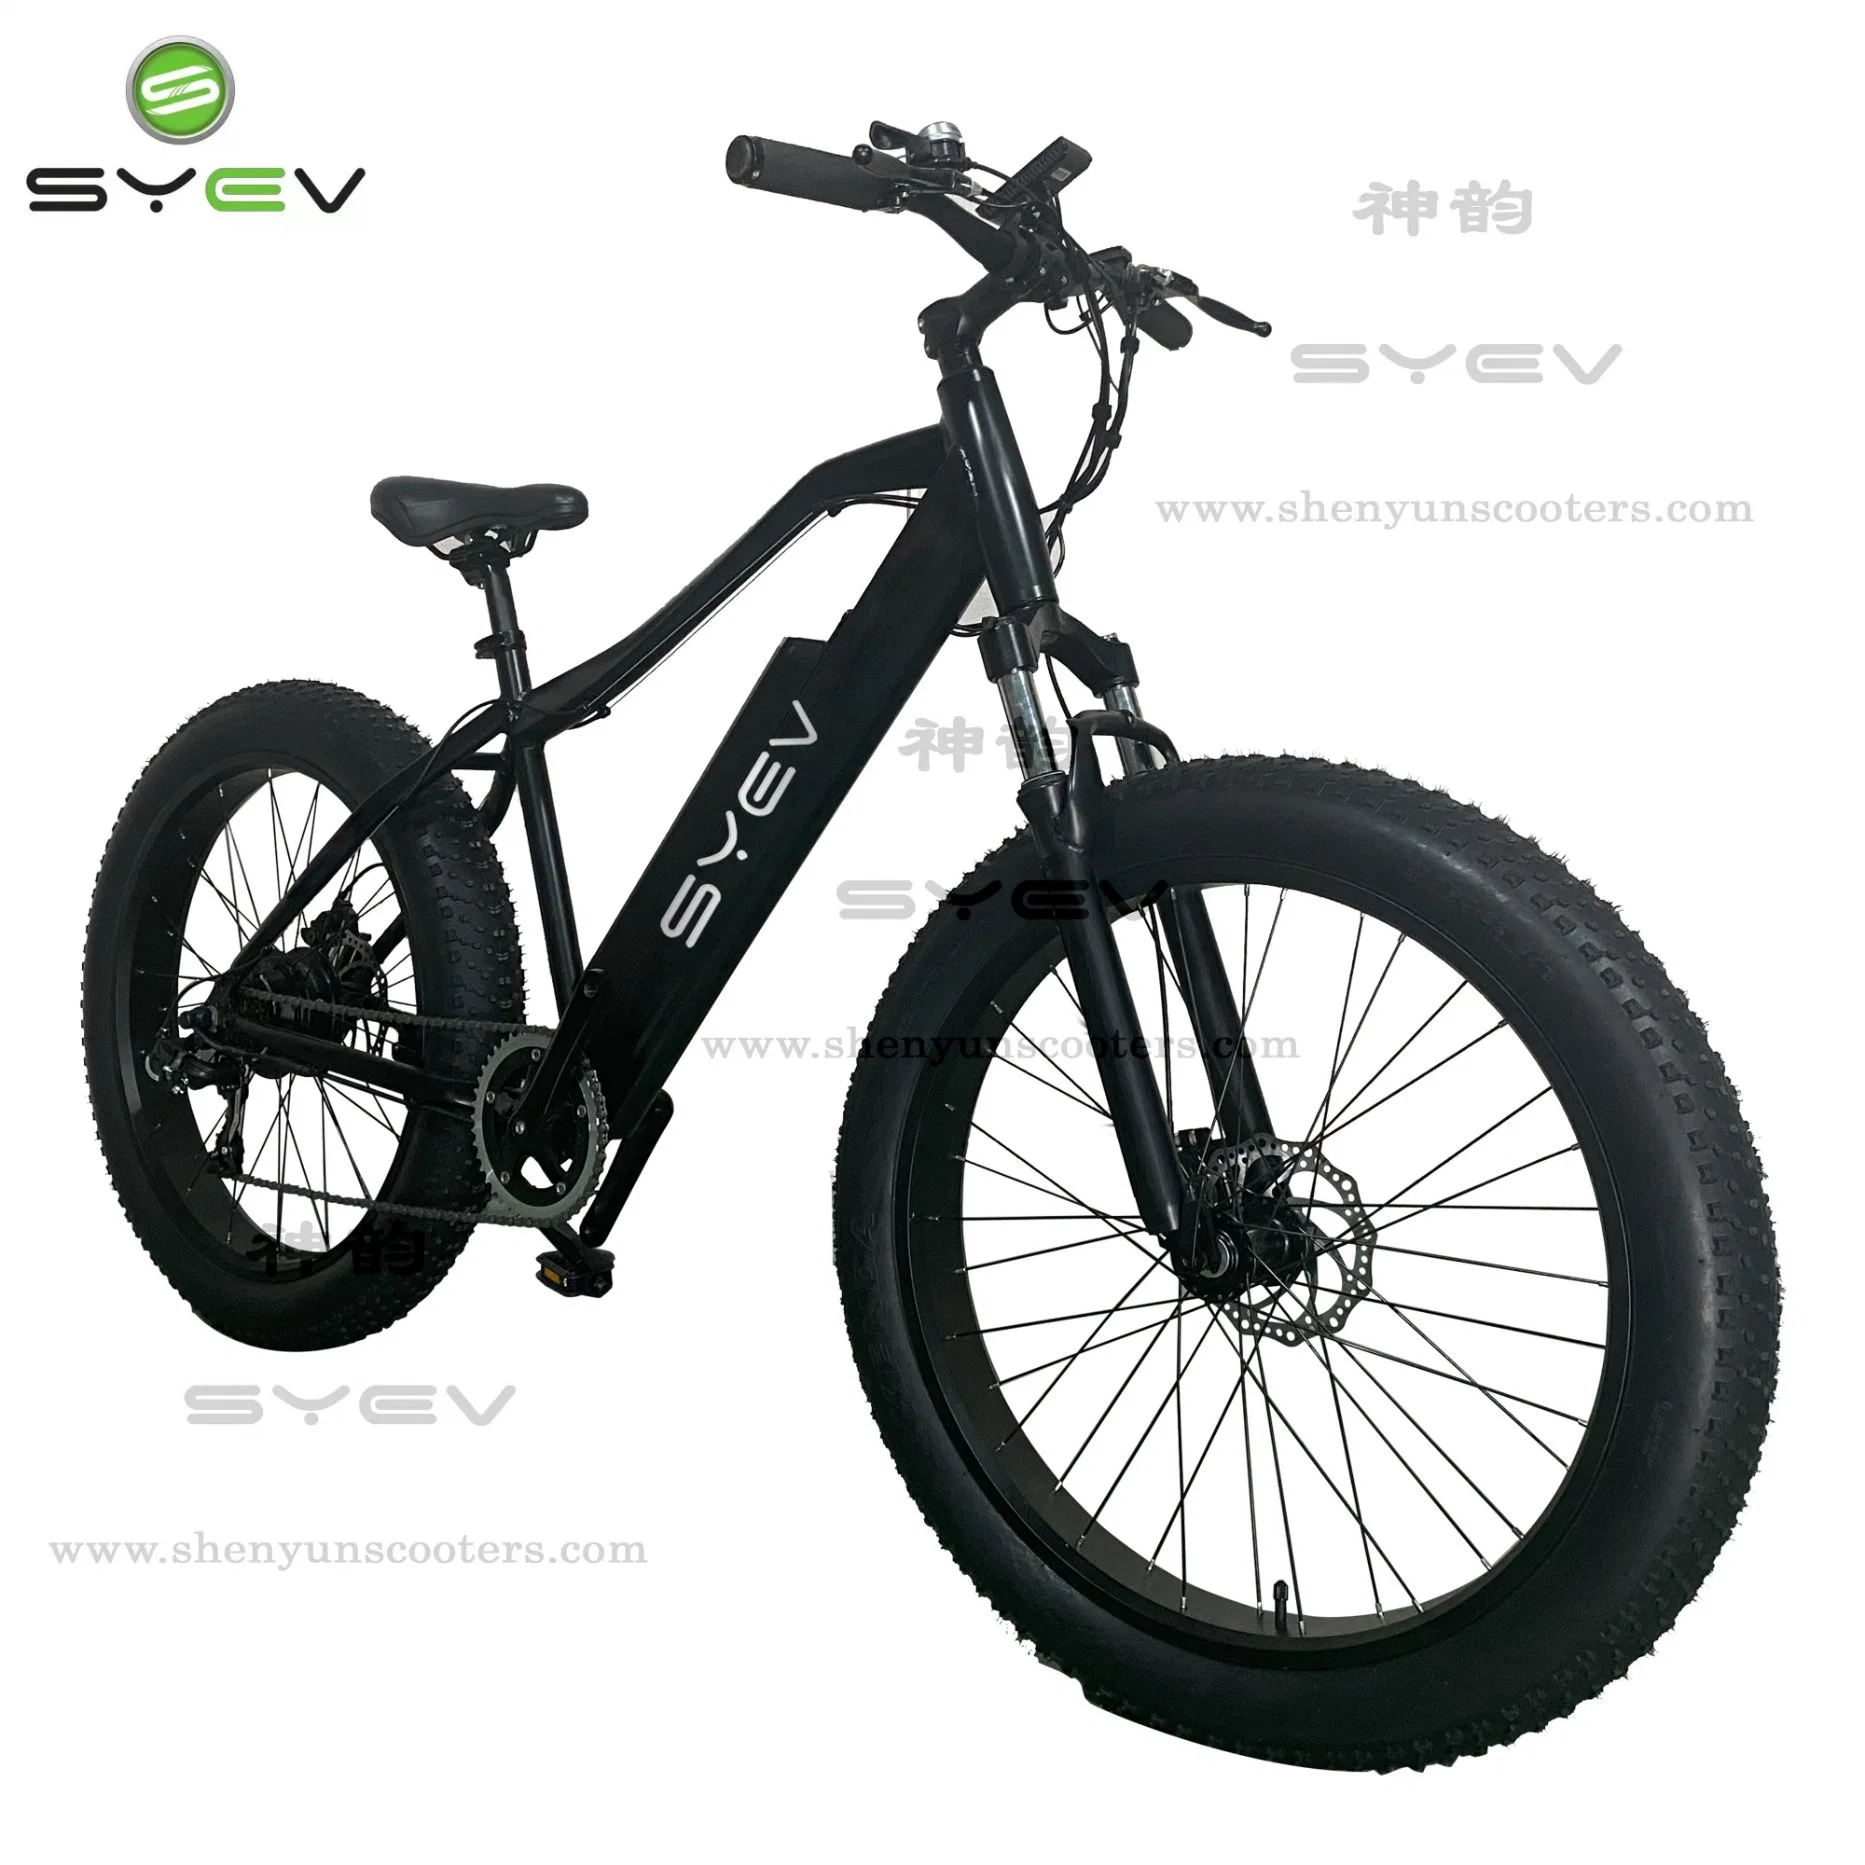 Wuxi Shenyun Factory New High Performance 26" Fat Tyre Aluminum Alloy Mountain Electric Bike for Youth